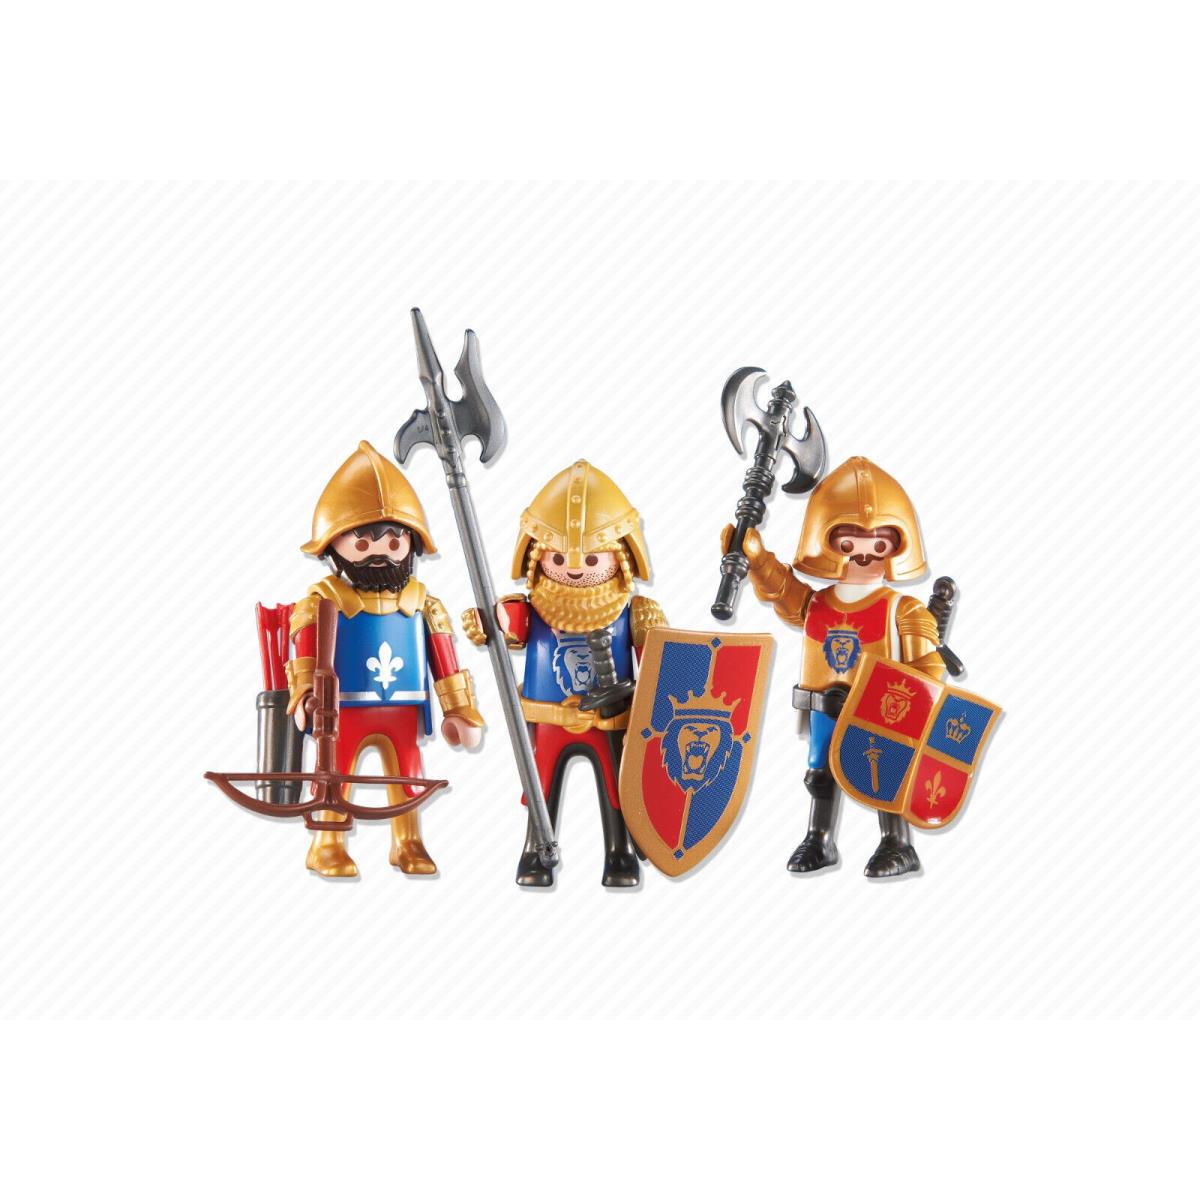 Playmobil 6379 3 Lion Knight Figures Red Blue Crossbow Axe Add-on Bag